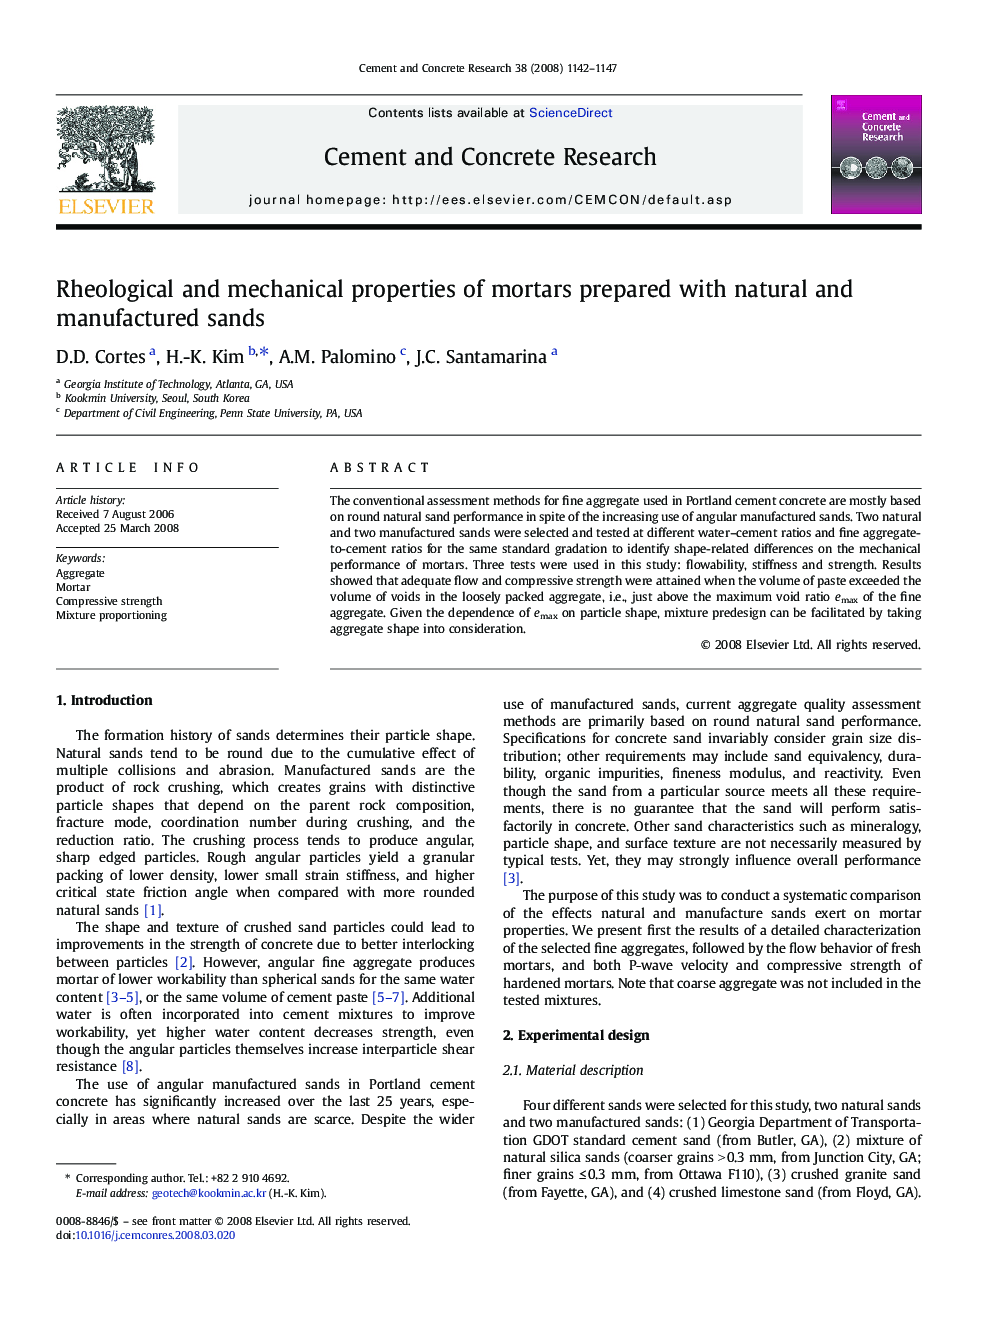 Rheological and mechanical properties of mortars prepared with natural and manufactured sands